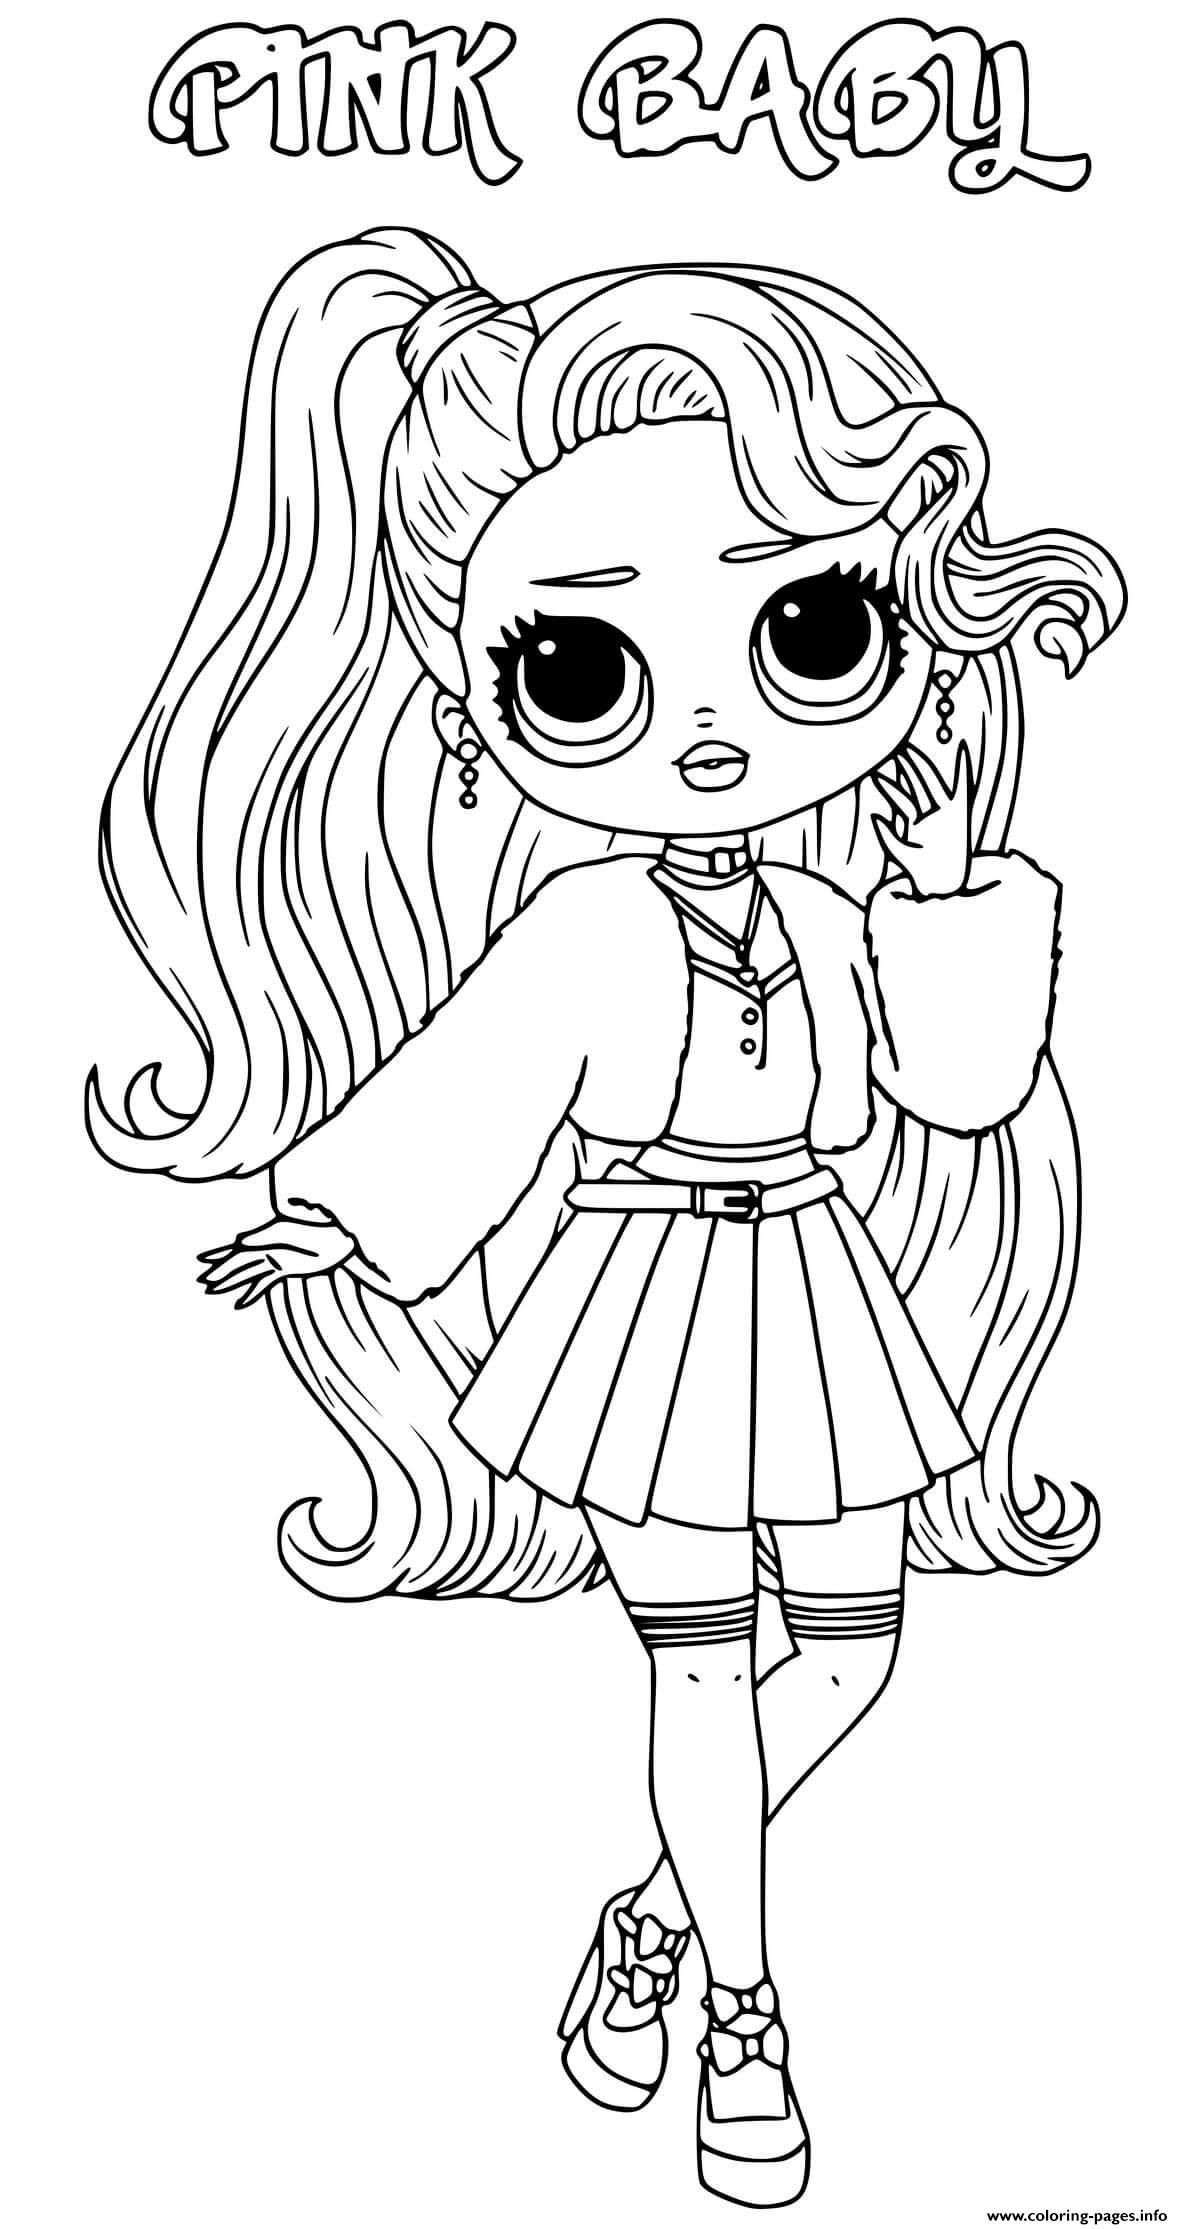 Print pink baby lol omg coloring pages puppy coloring pages cute coloring pages coloring pages